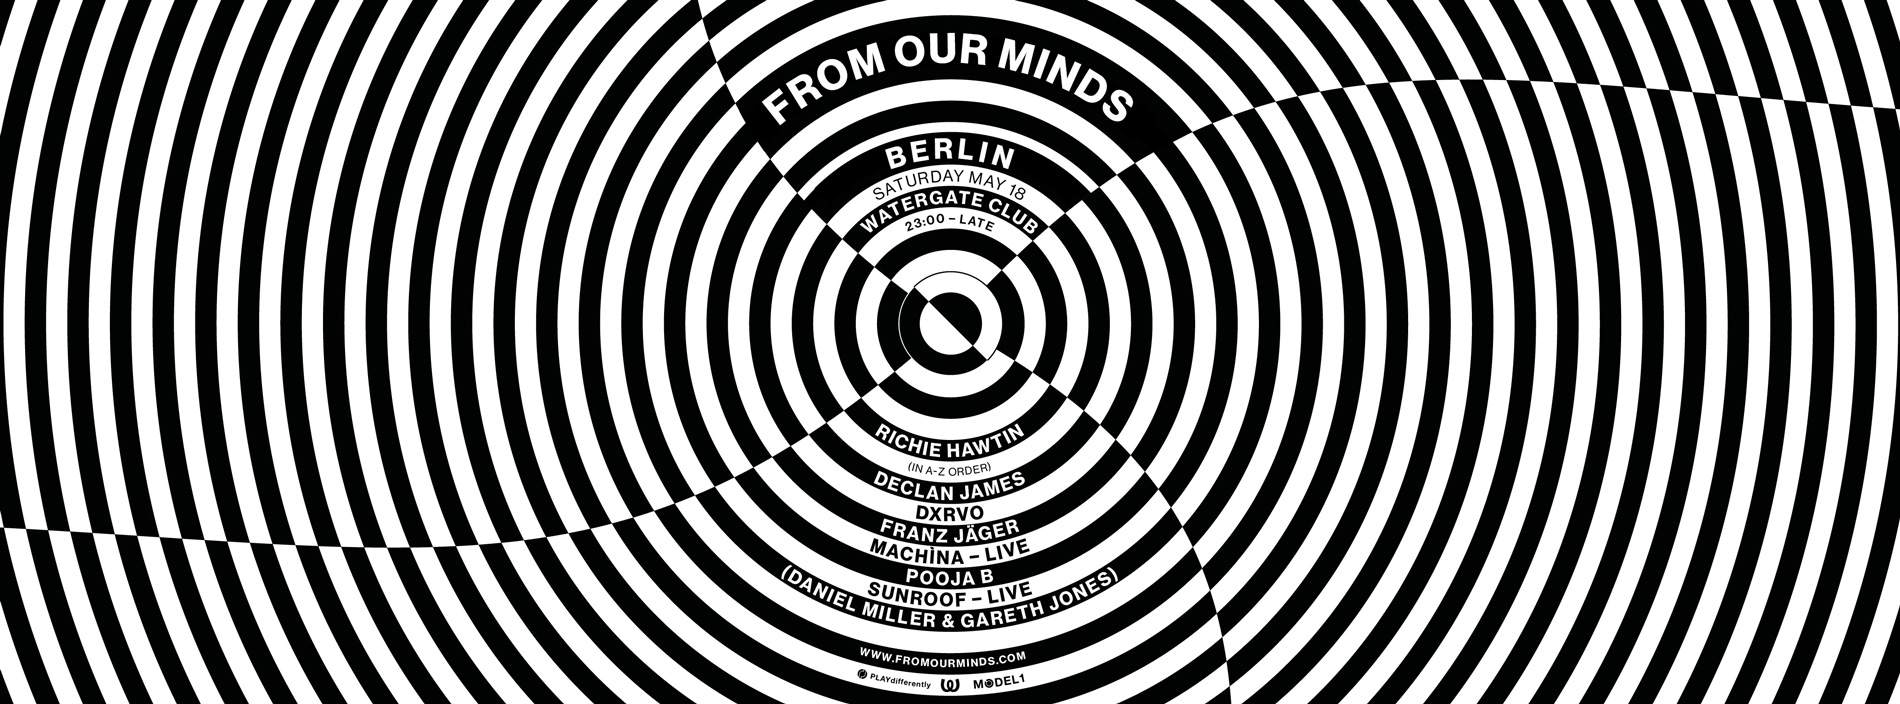 FROM OUR MINDS / Richie Hawtin - Página frontal